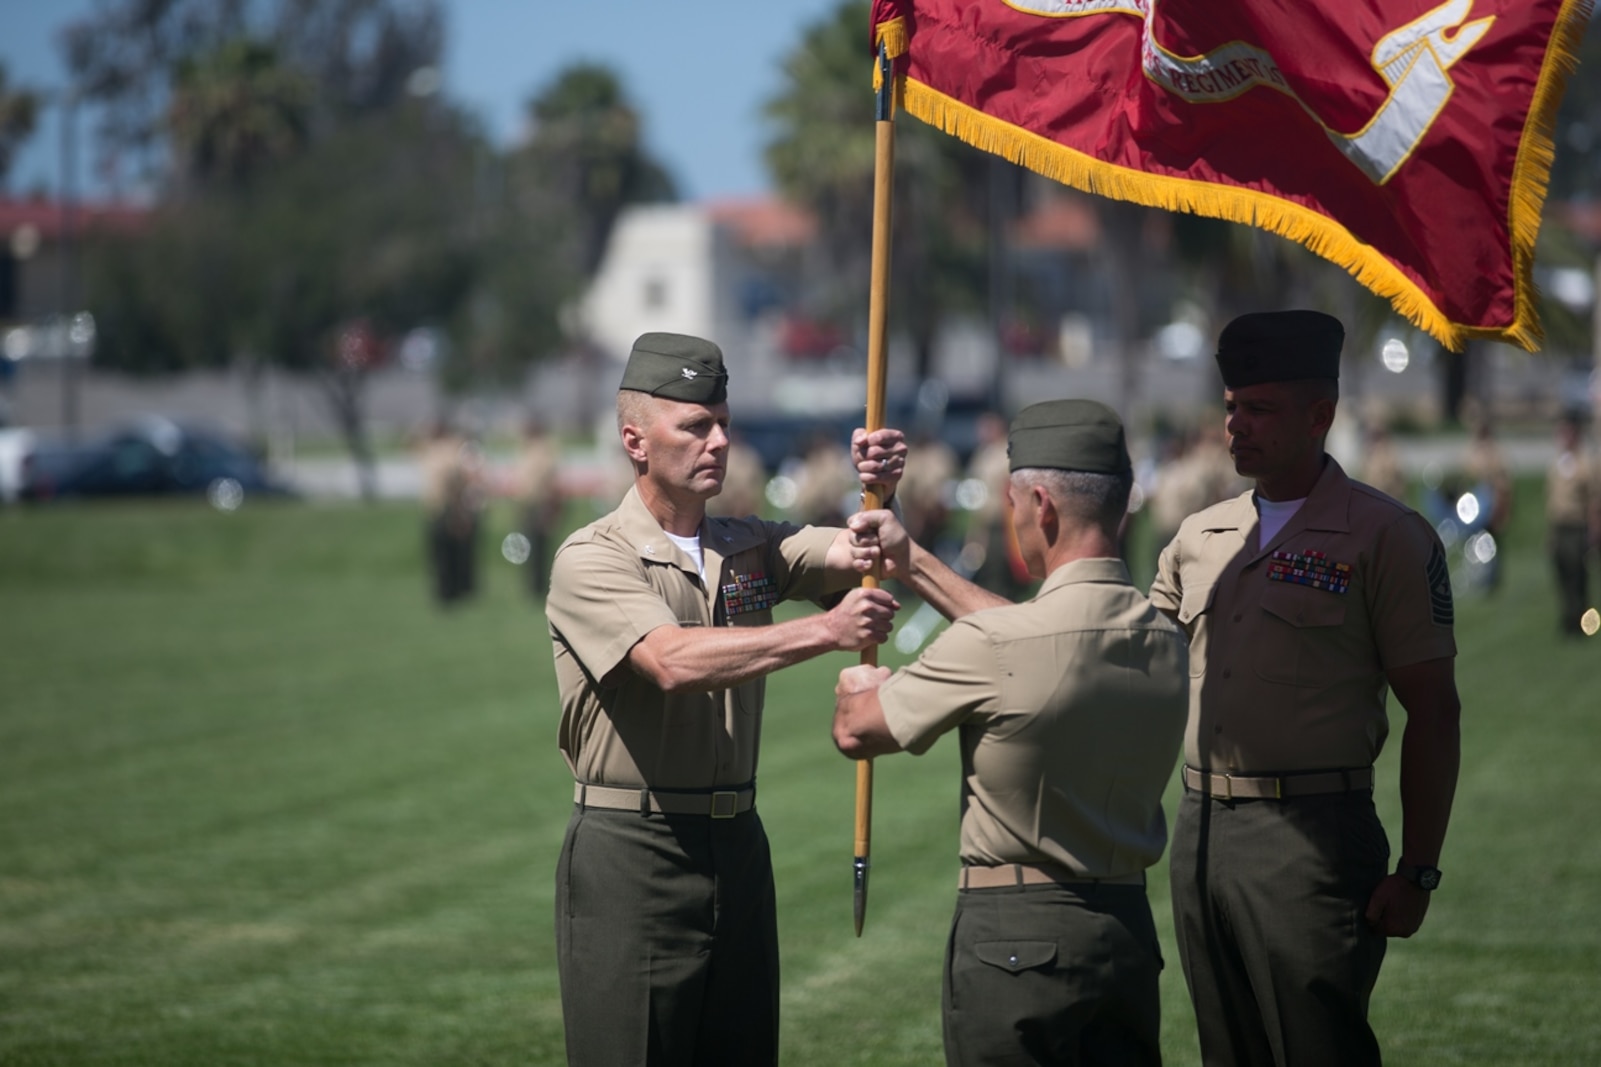 U.S. Marine Col. Phillip N. Frietze (center) exchanges the regimental colors with Col. James R. Hensein (left) during the Headquarters Regiment, 1st Marine Logistics Group, change of command ceremony on Camp Pendleton, Calif., June 15, 2017. The ceremony included marching of the colors, passing of the regimental colors, presenting Col. Frietze his away and closing remarks from the oncoming and off going personnel as well as the 1st Marine Logistics Group Commanding General, Brig. Gen. David A. Ottignon. (U.S. Marine Corps photo by Lance Cpl. Timothy Shoemaker)